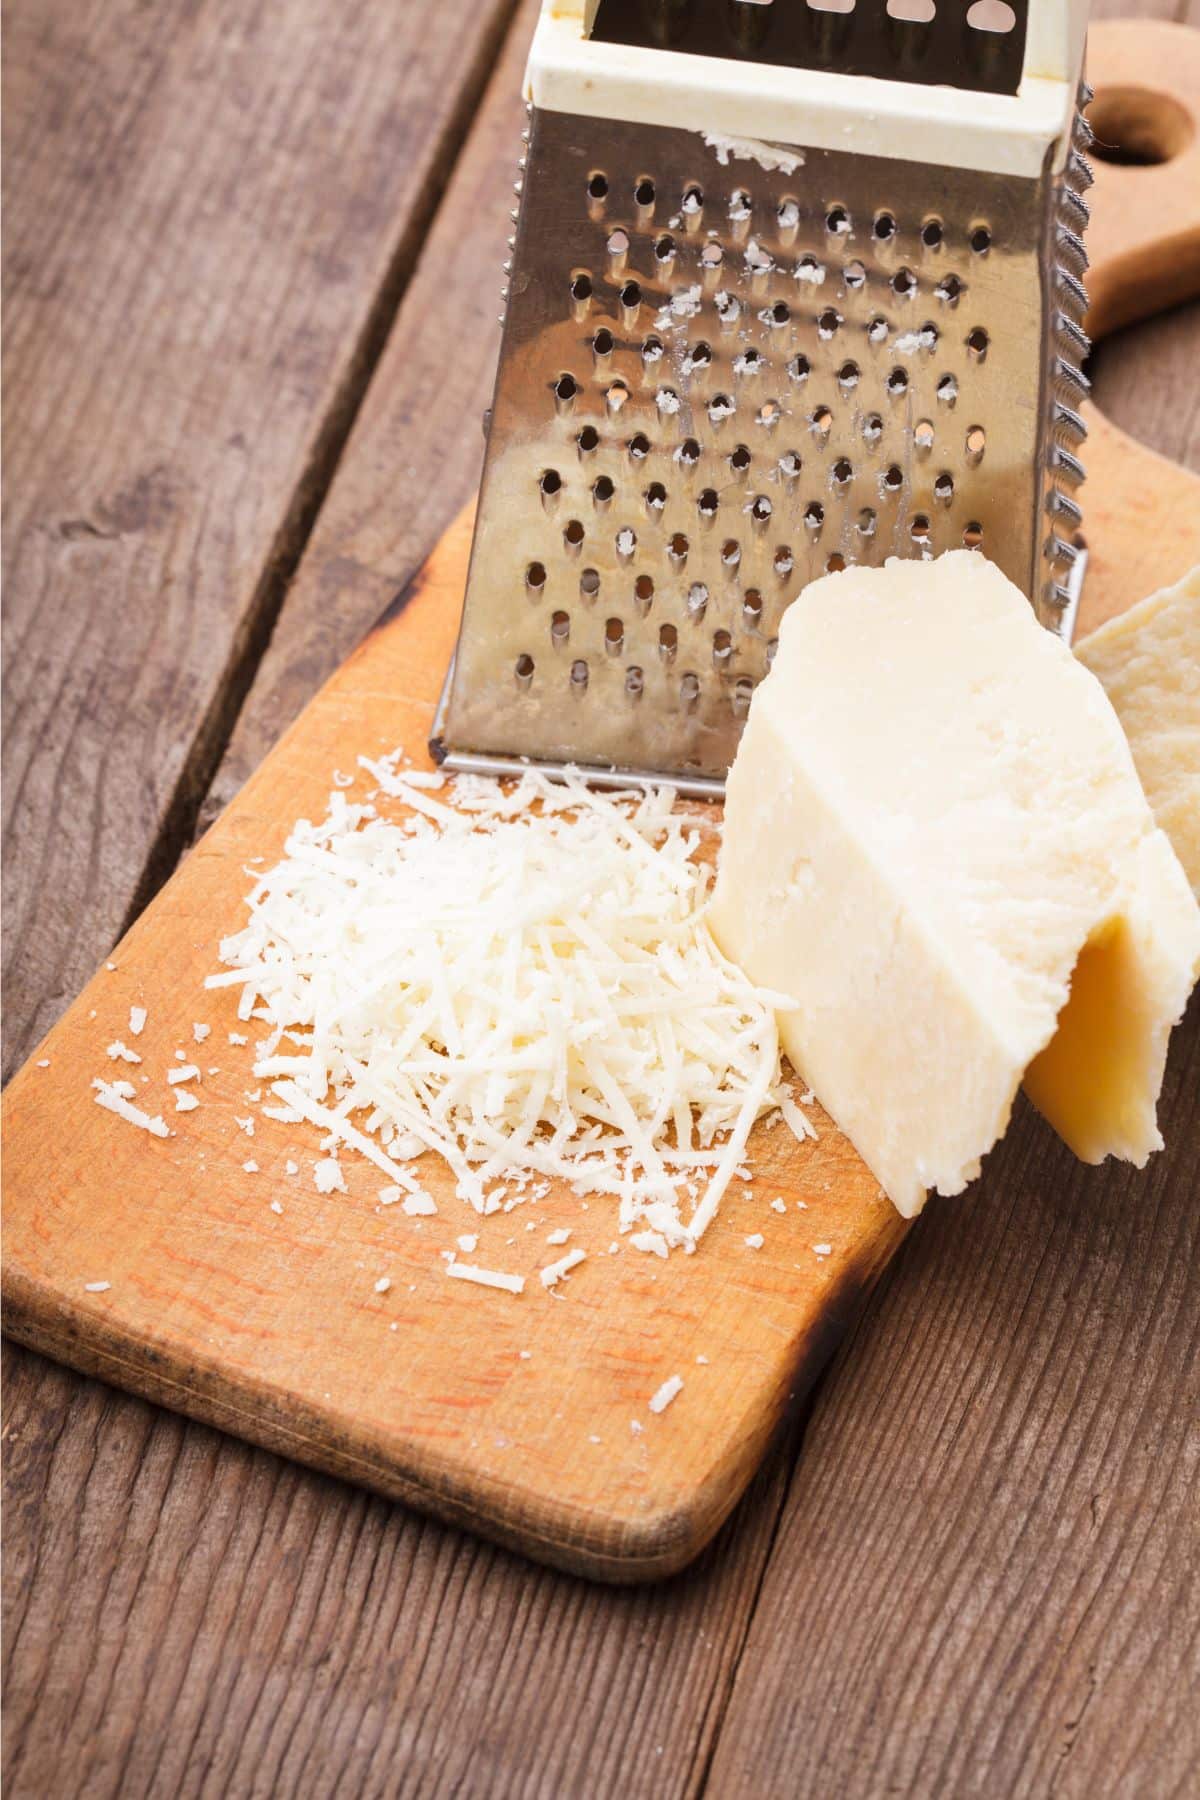 Grated parmesan cheese on wooden surface.